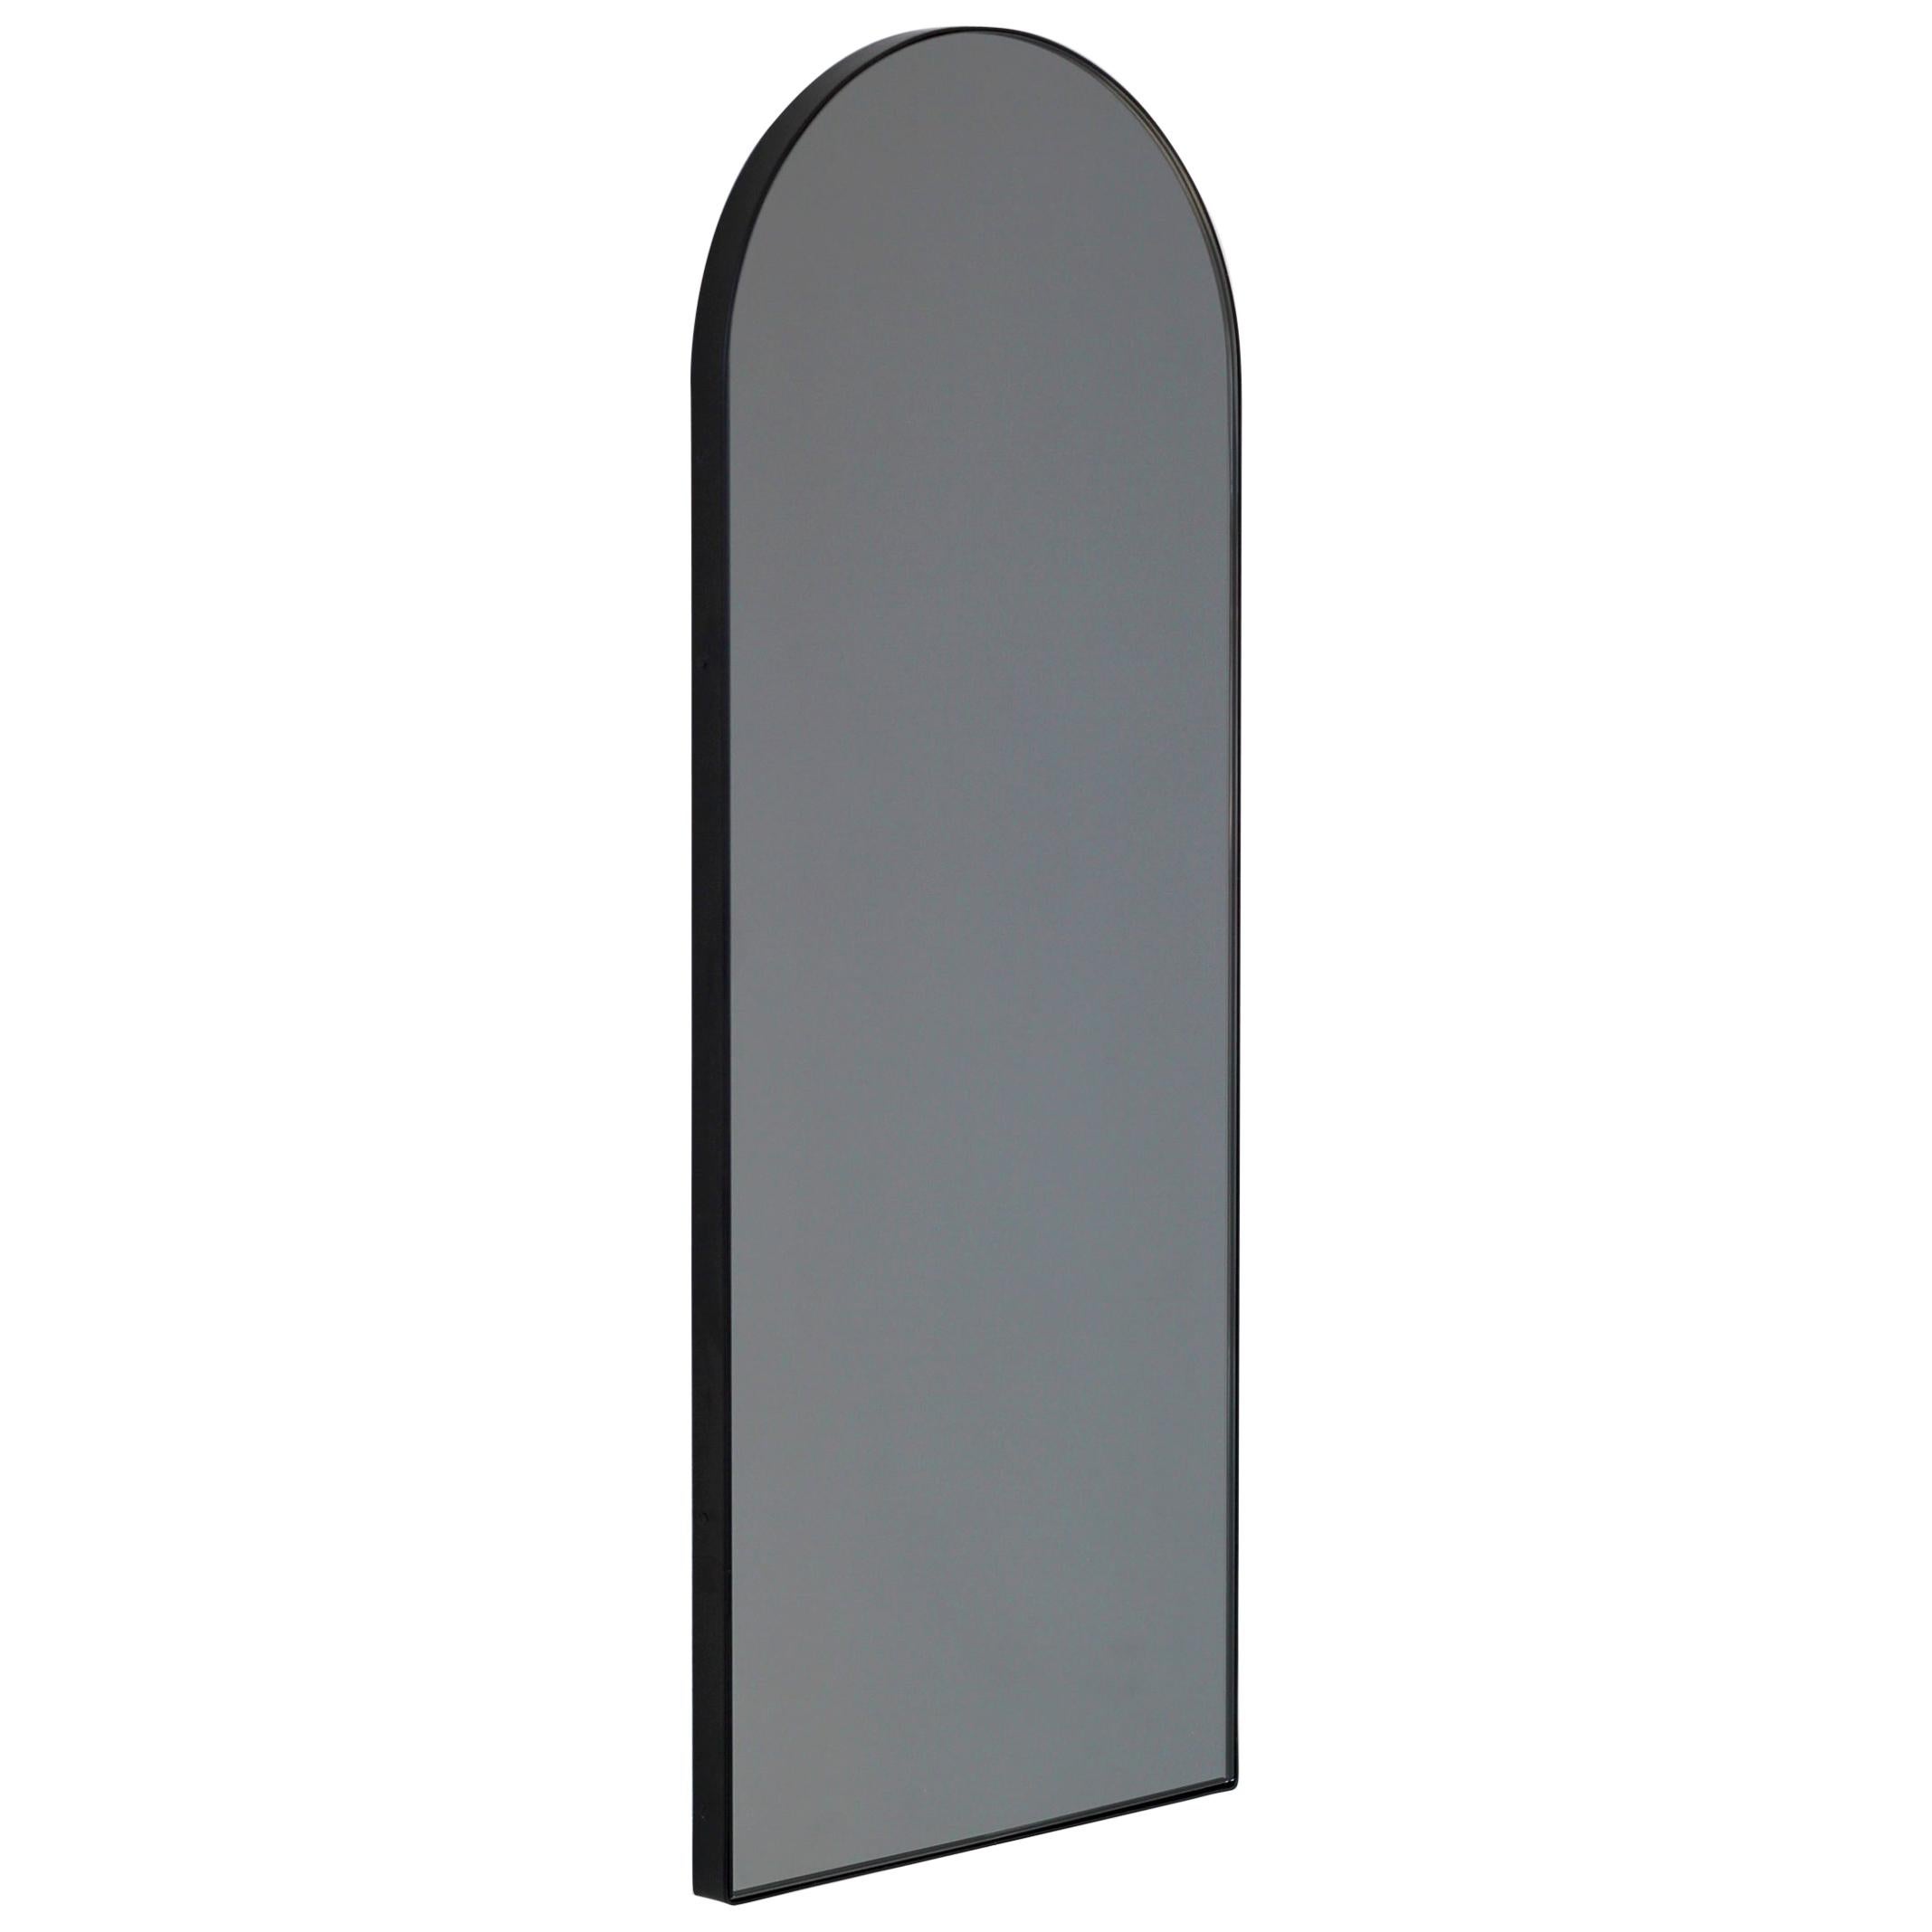 Arcus Arch shaped Black Tinted Art Deco Mirror with a Black Frame, Small